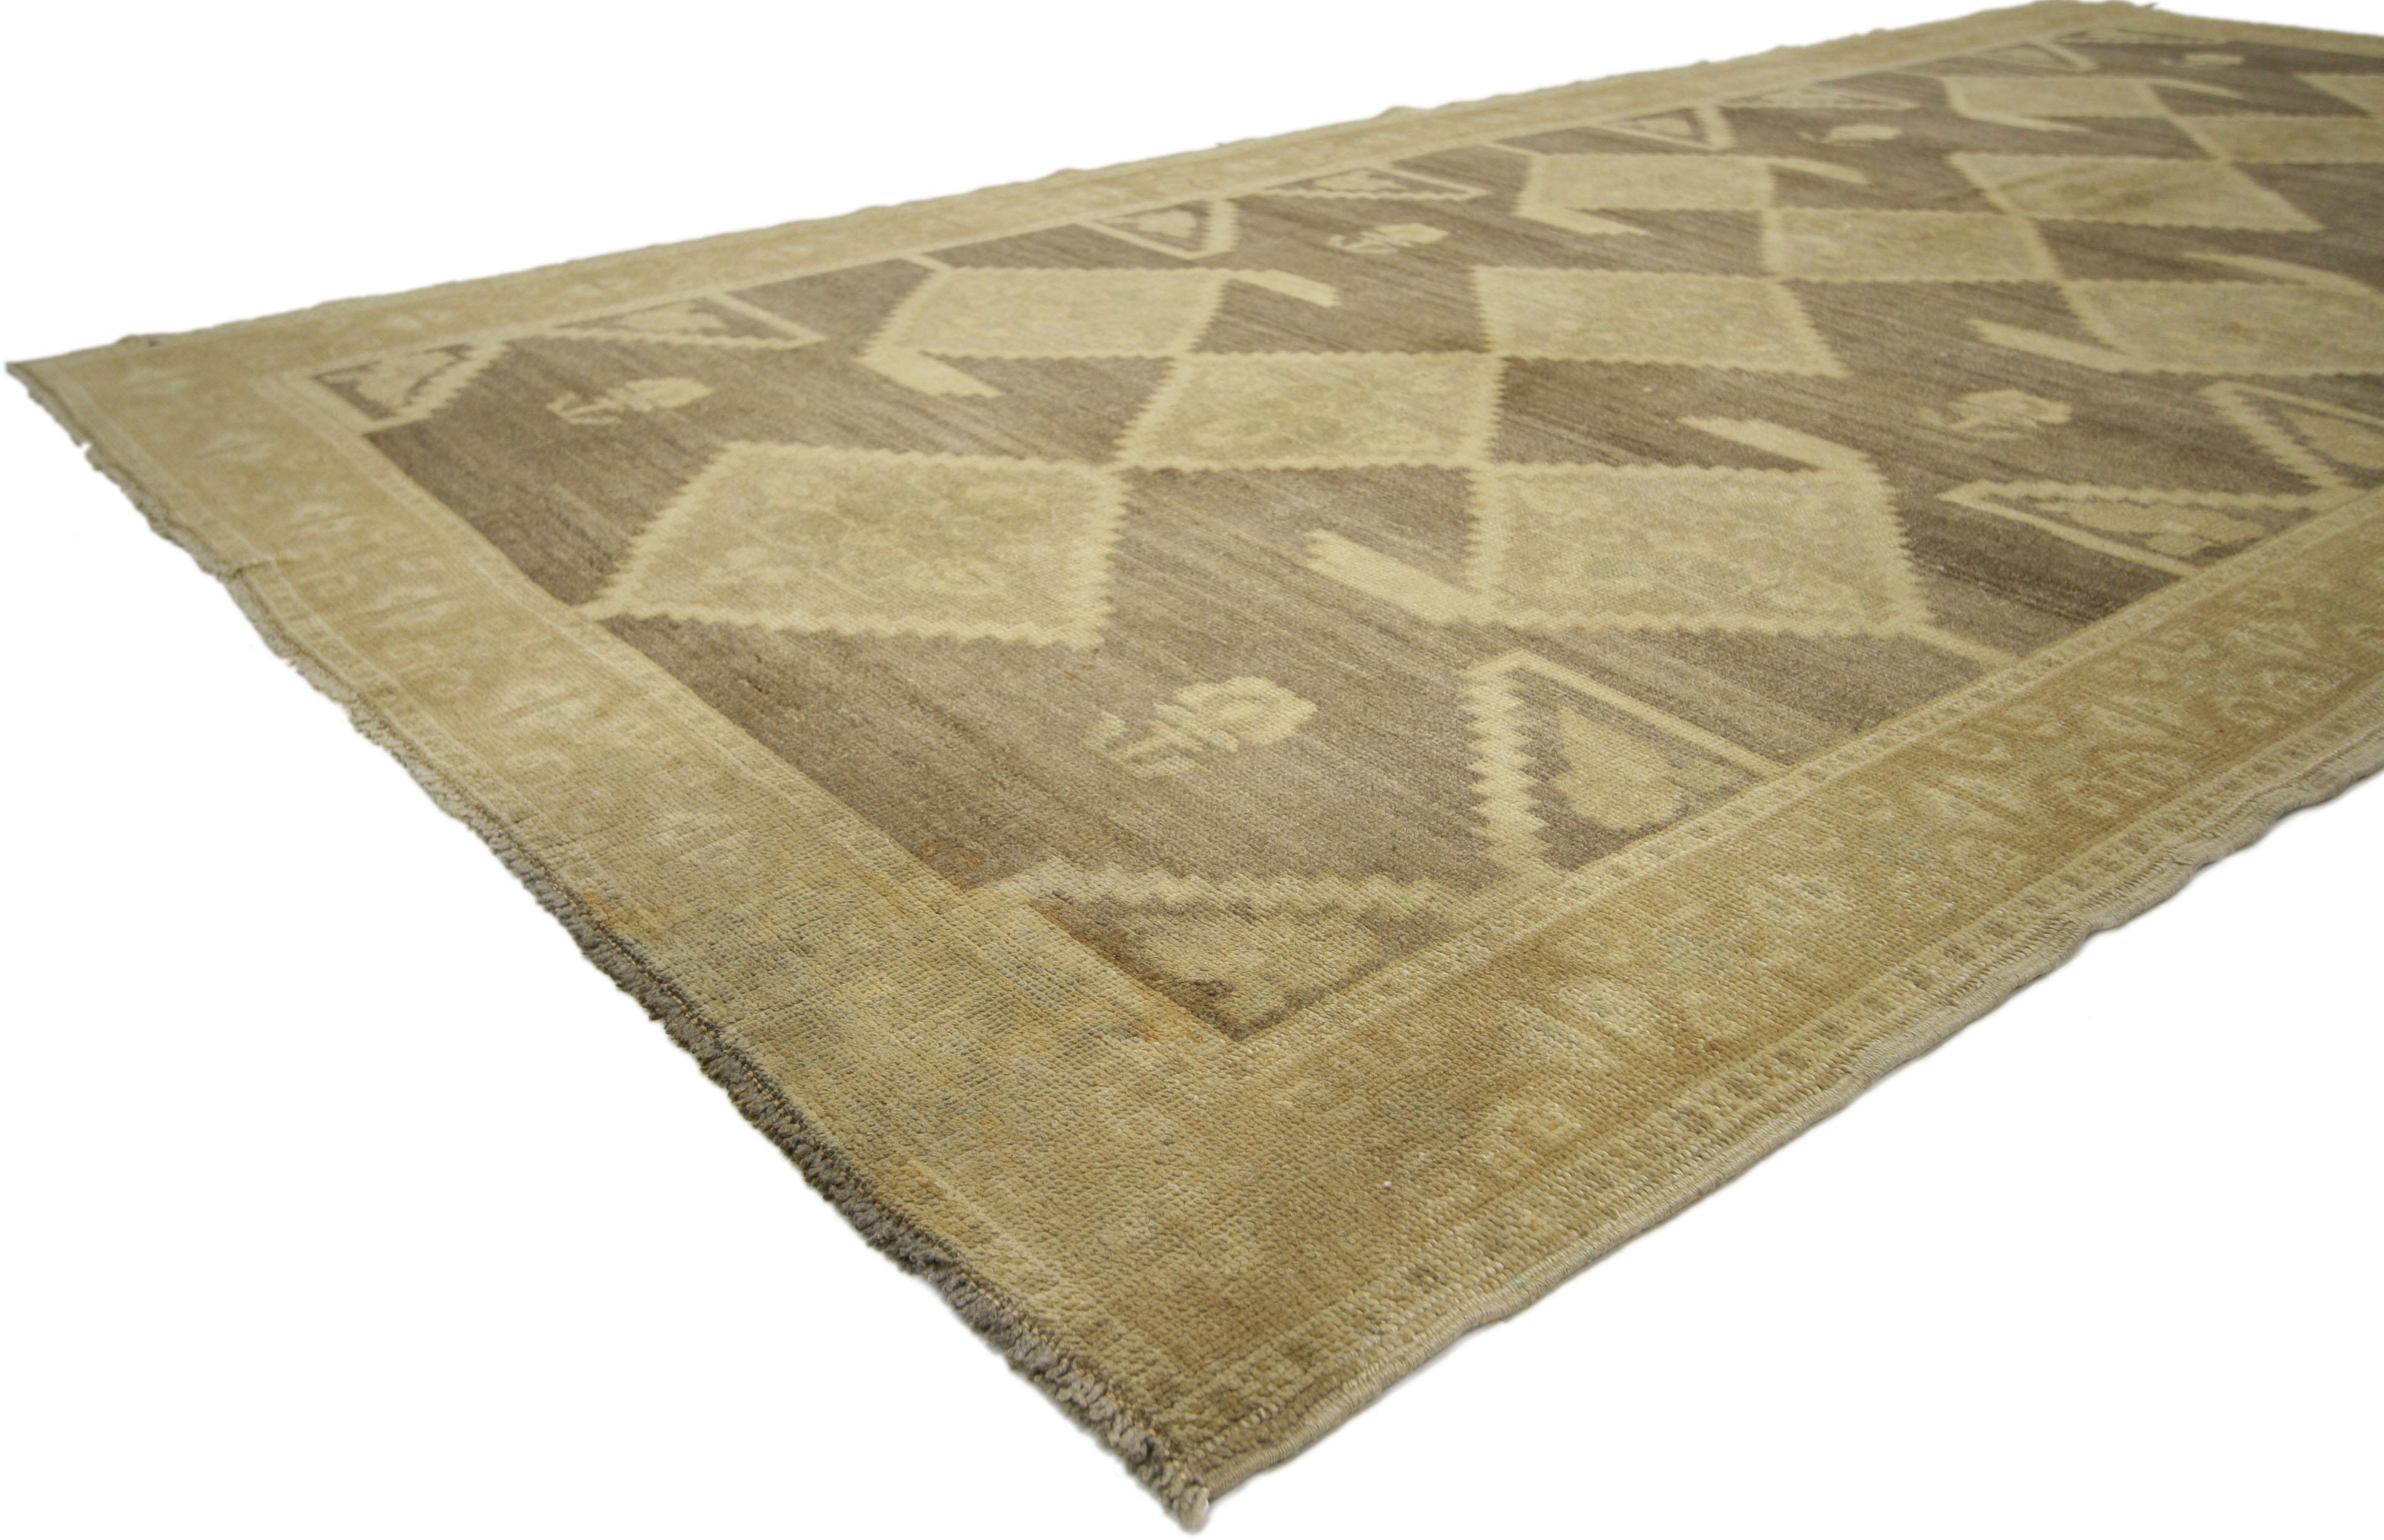 50845, vintage Turkish Oushak rug with Swedish Farmhouse style. Emanating timeless appeal and neutral hues, this hand knotted wool vintage Turkish Oushak rug exhibits a nostalgic charm with an eclectic vibe that is especially suitable within a